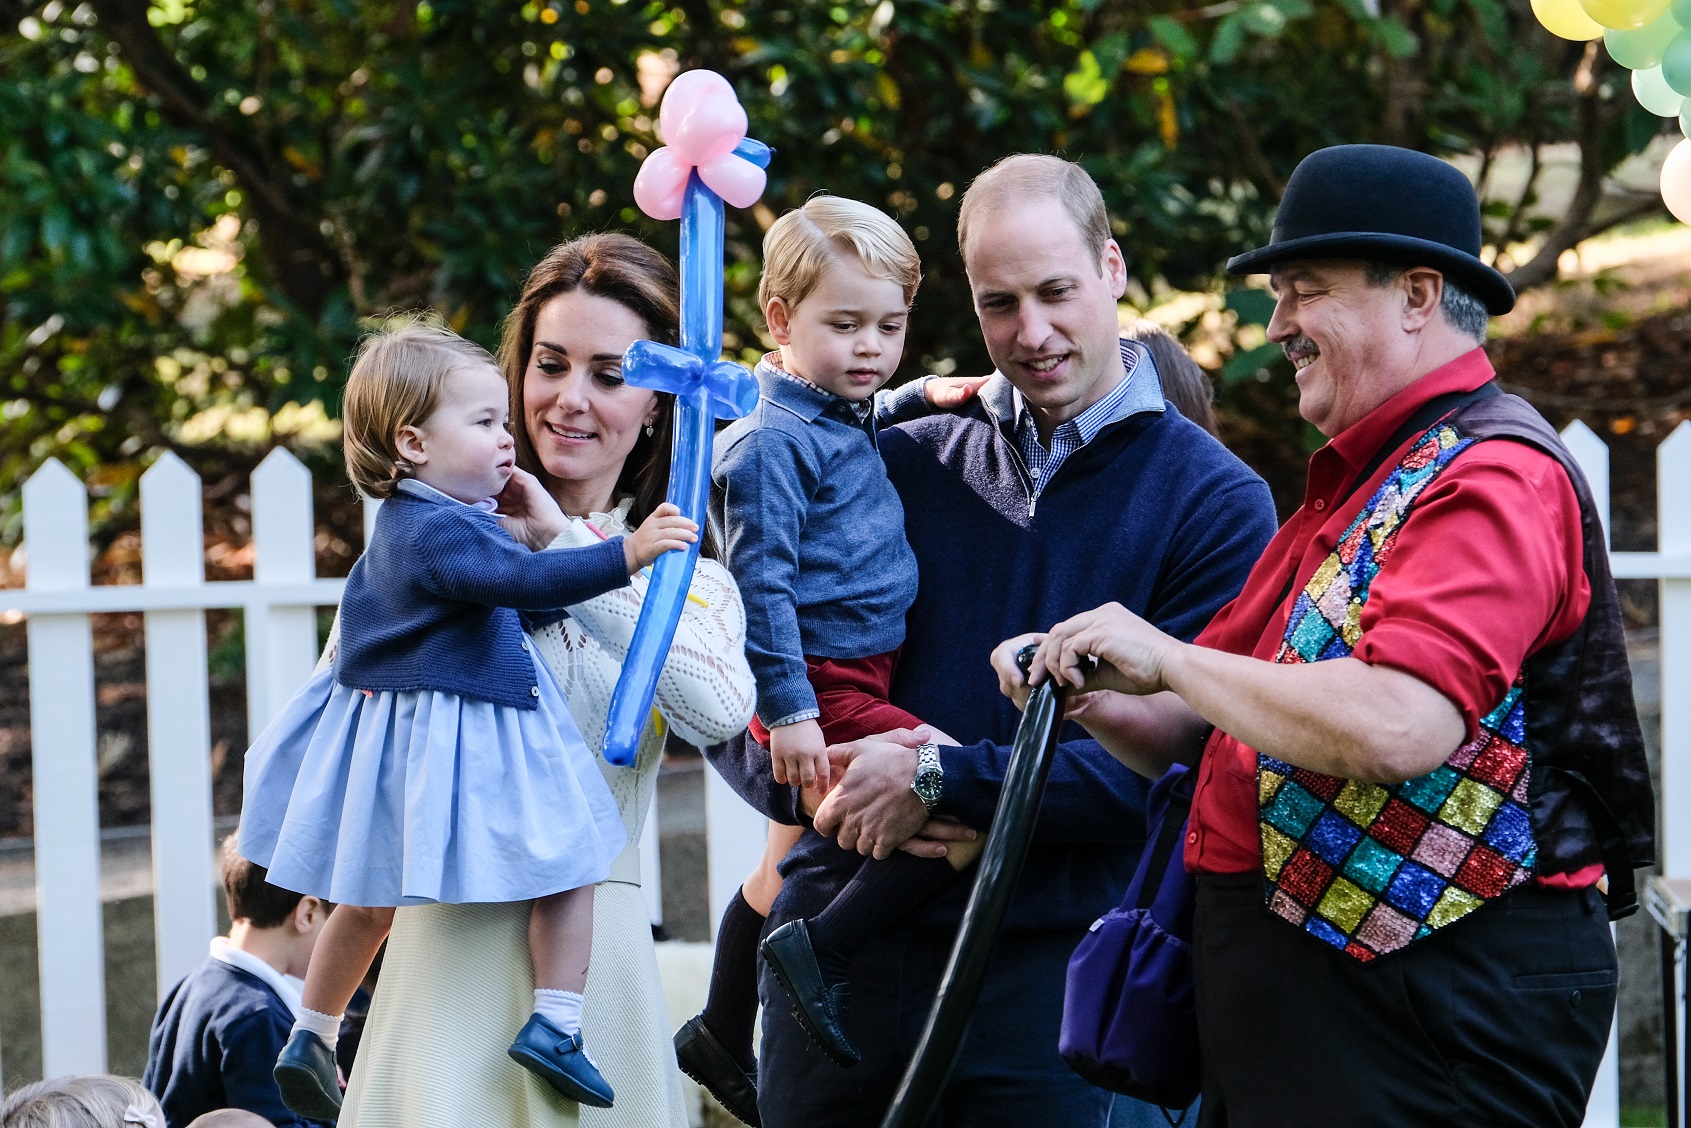 The Royal family at Children's Party